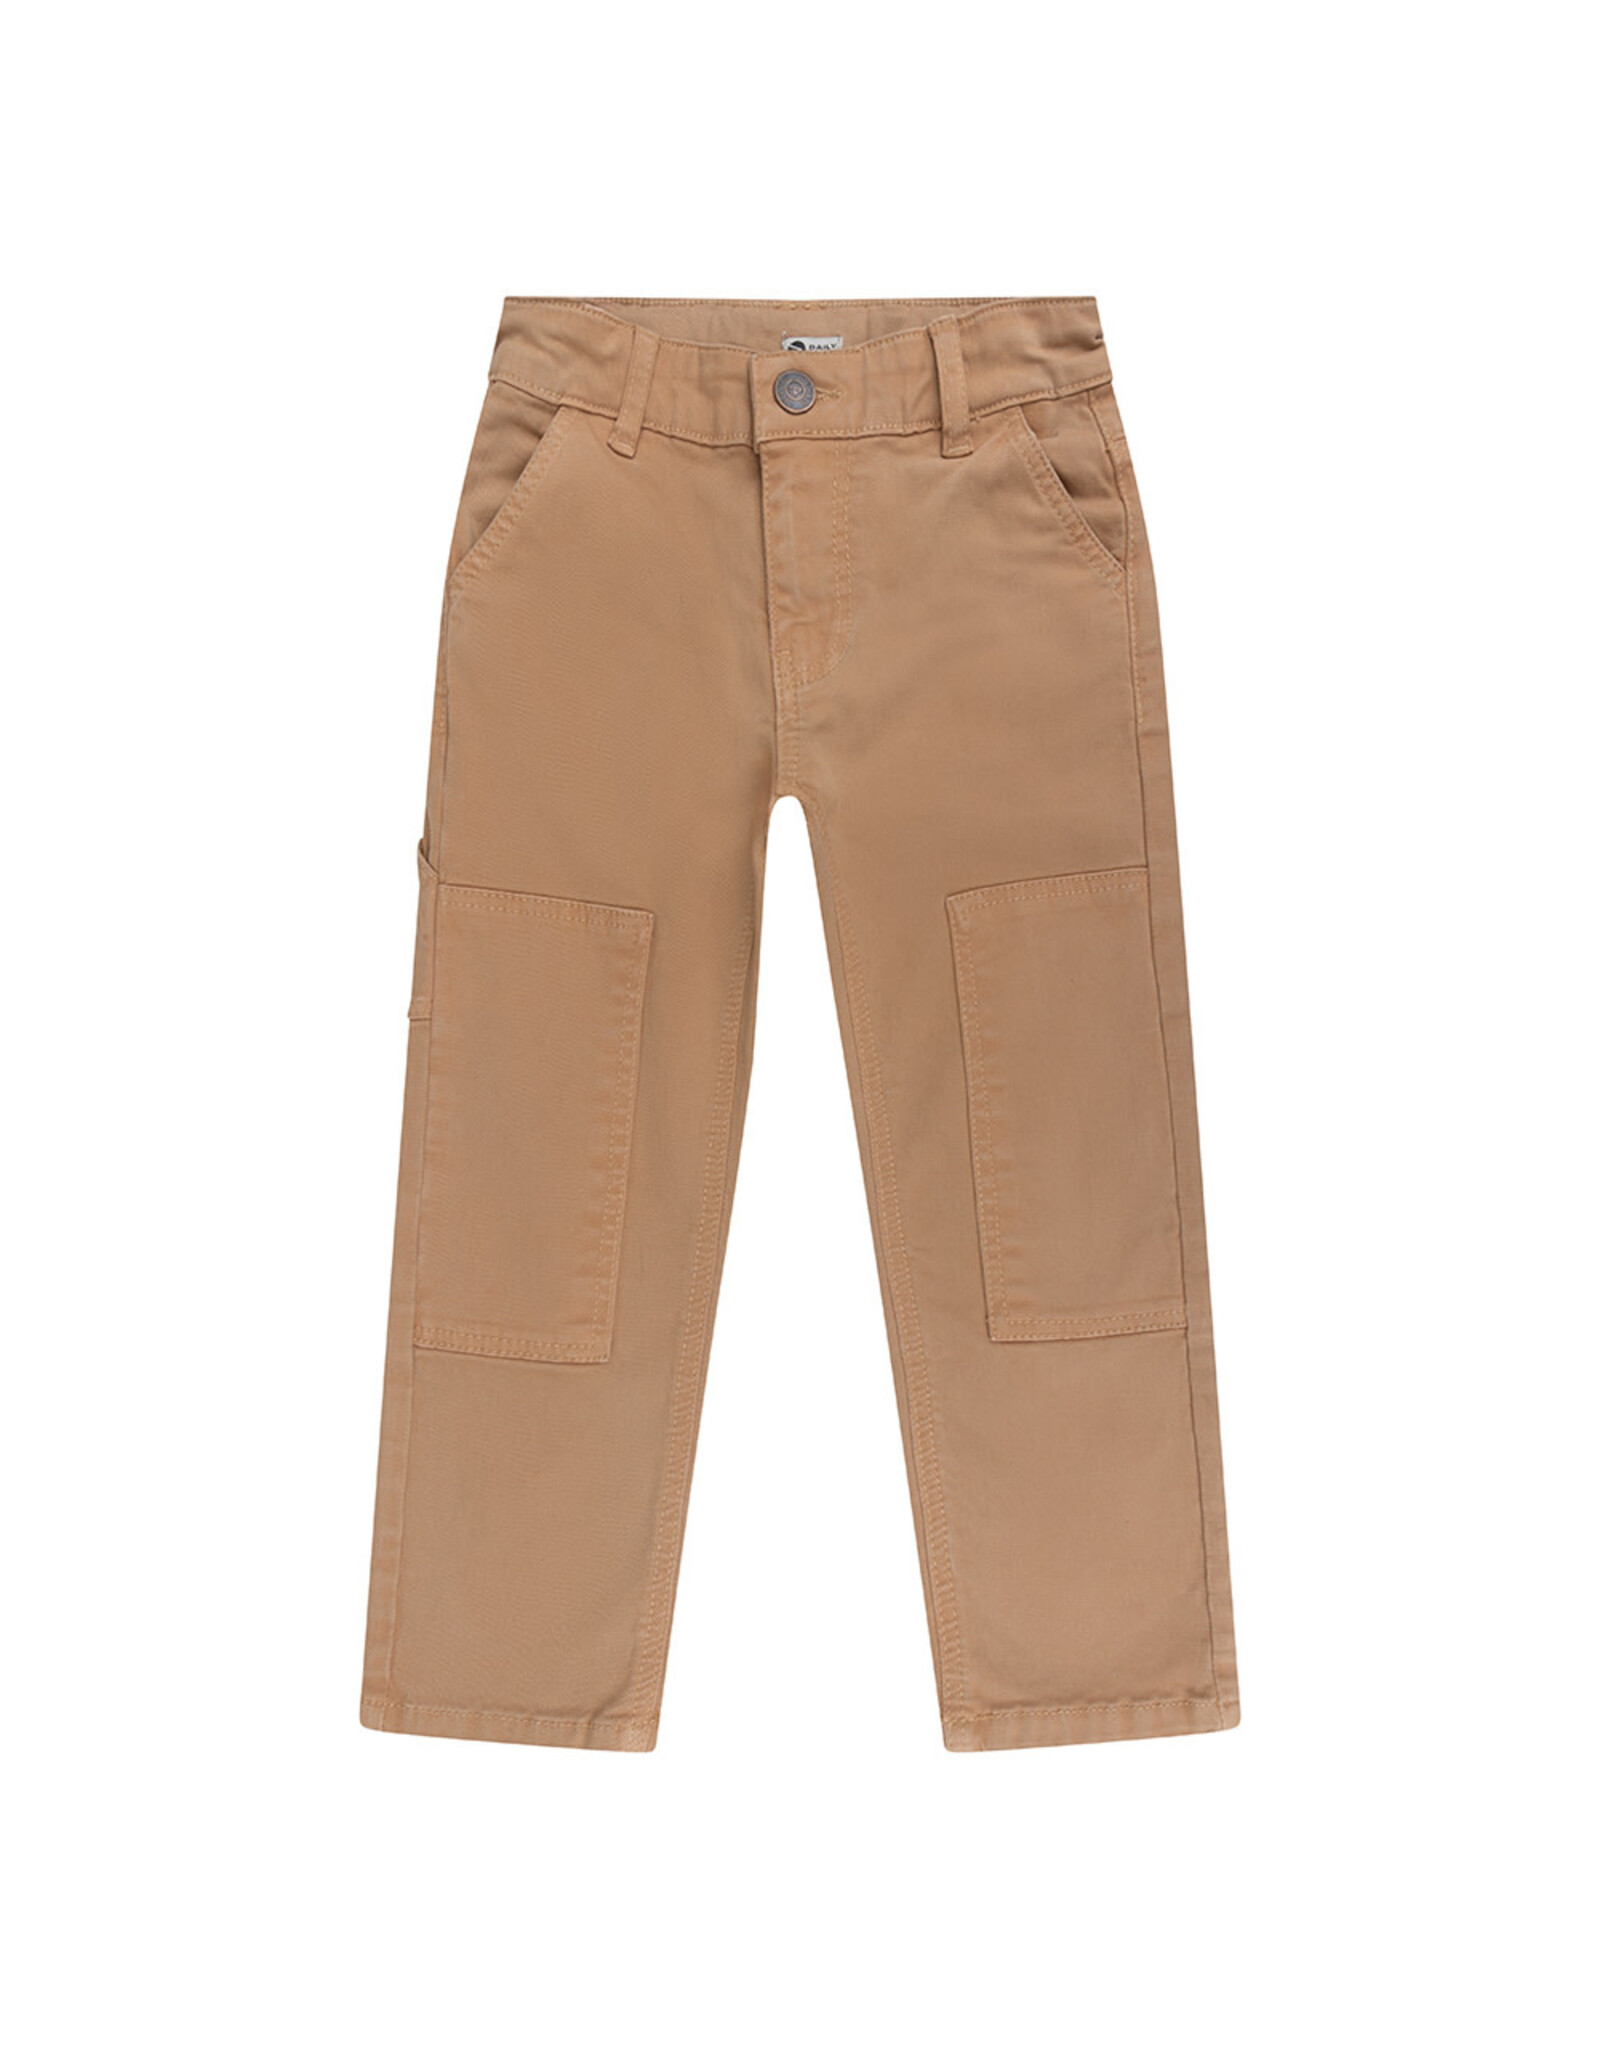 Daily7 Worker Straight Fit Camel sand